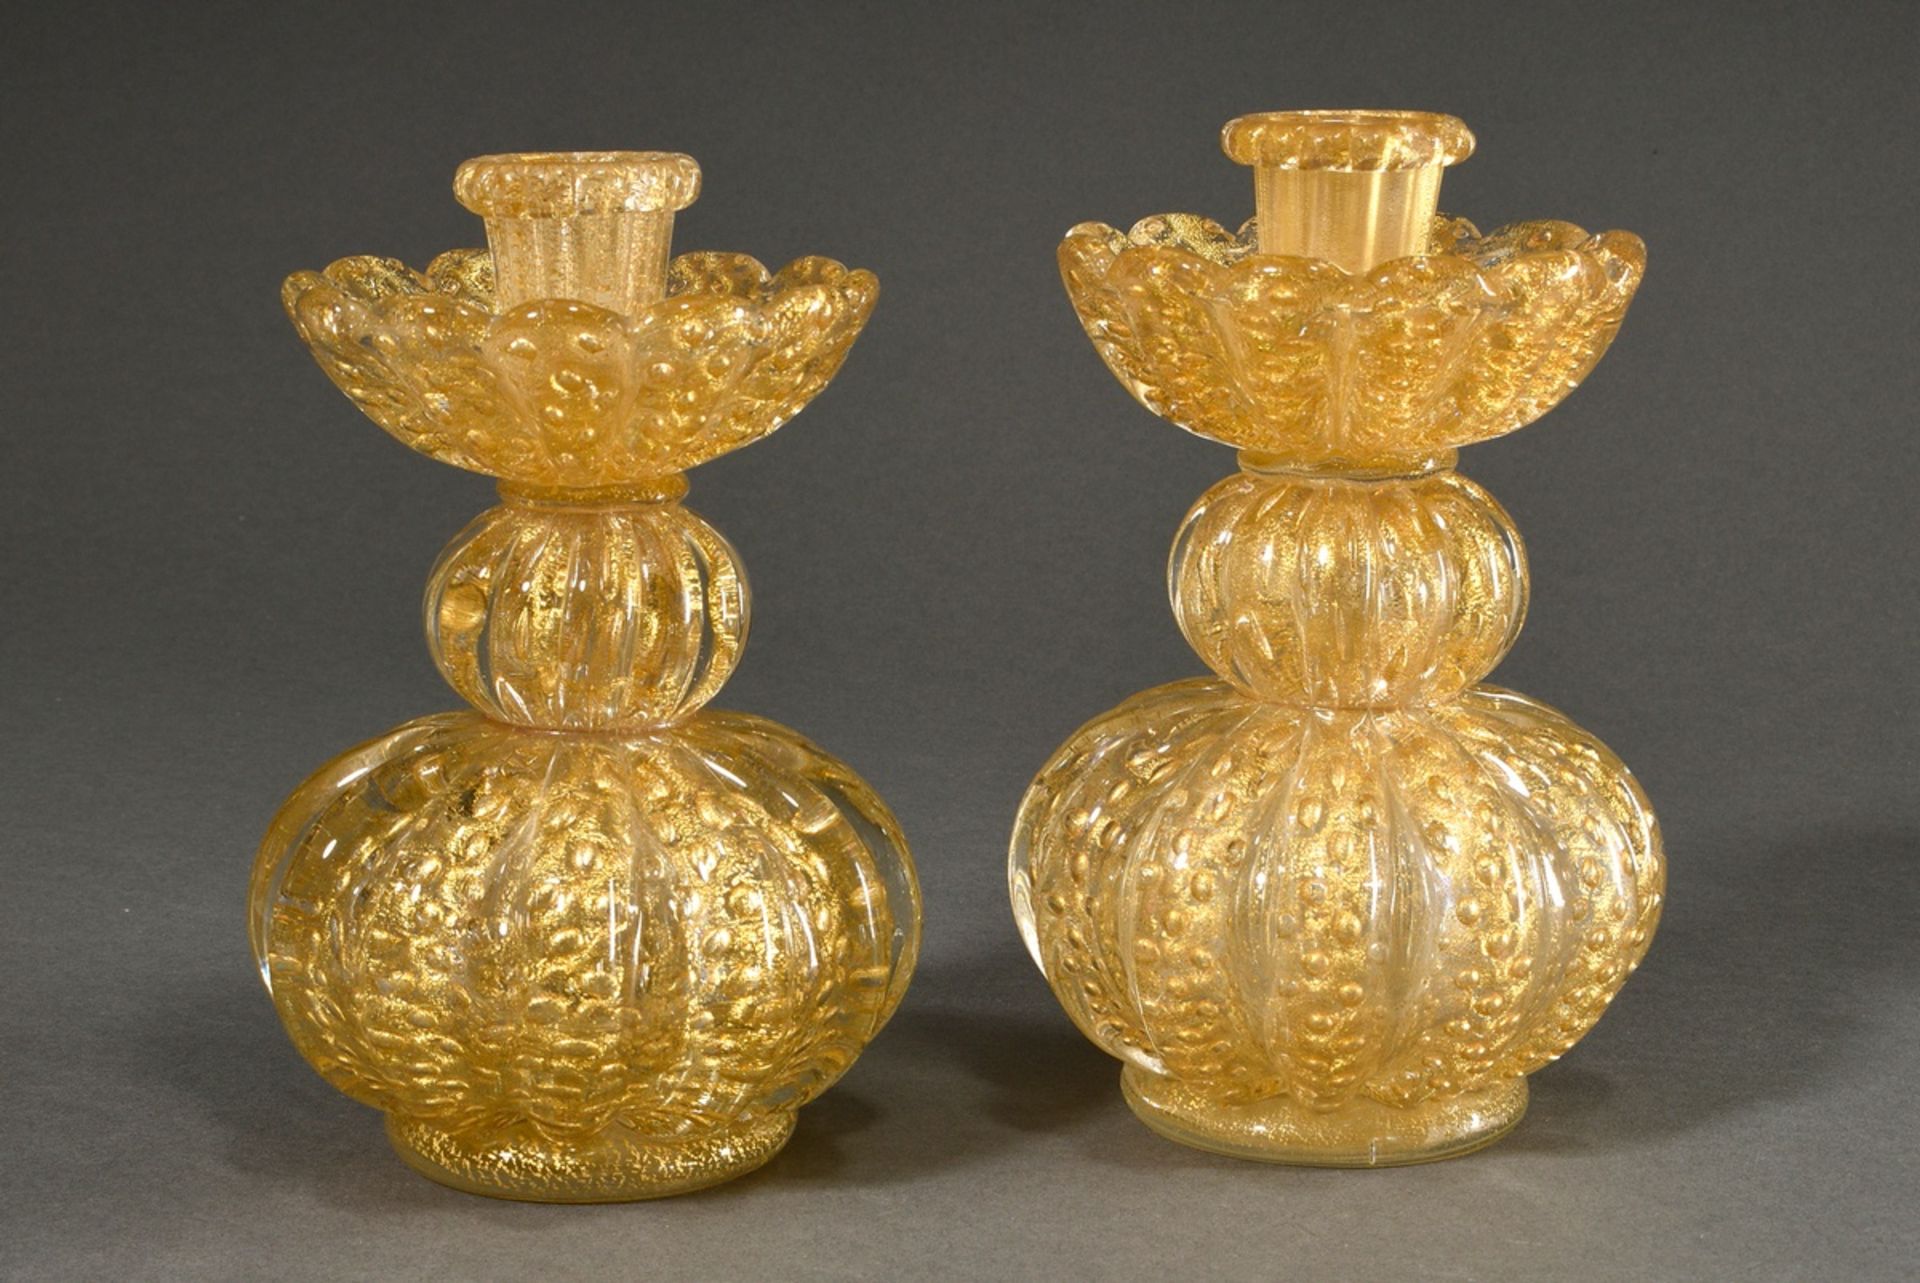 Pair of Barovier & Toso candlesticks in double baluster form, colourless crystal glass with melted  - Image 2 of 4